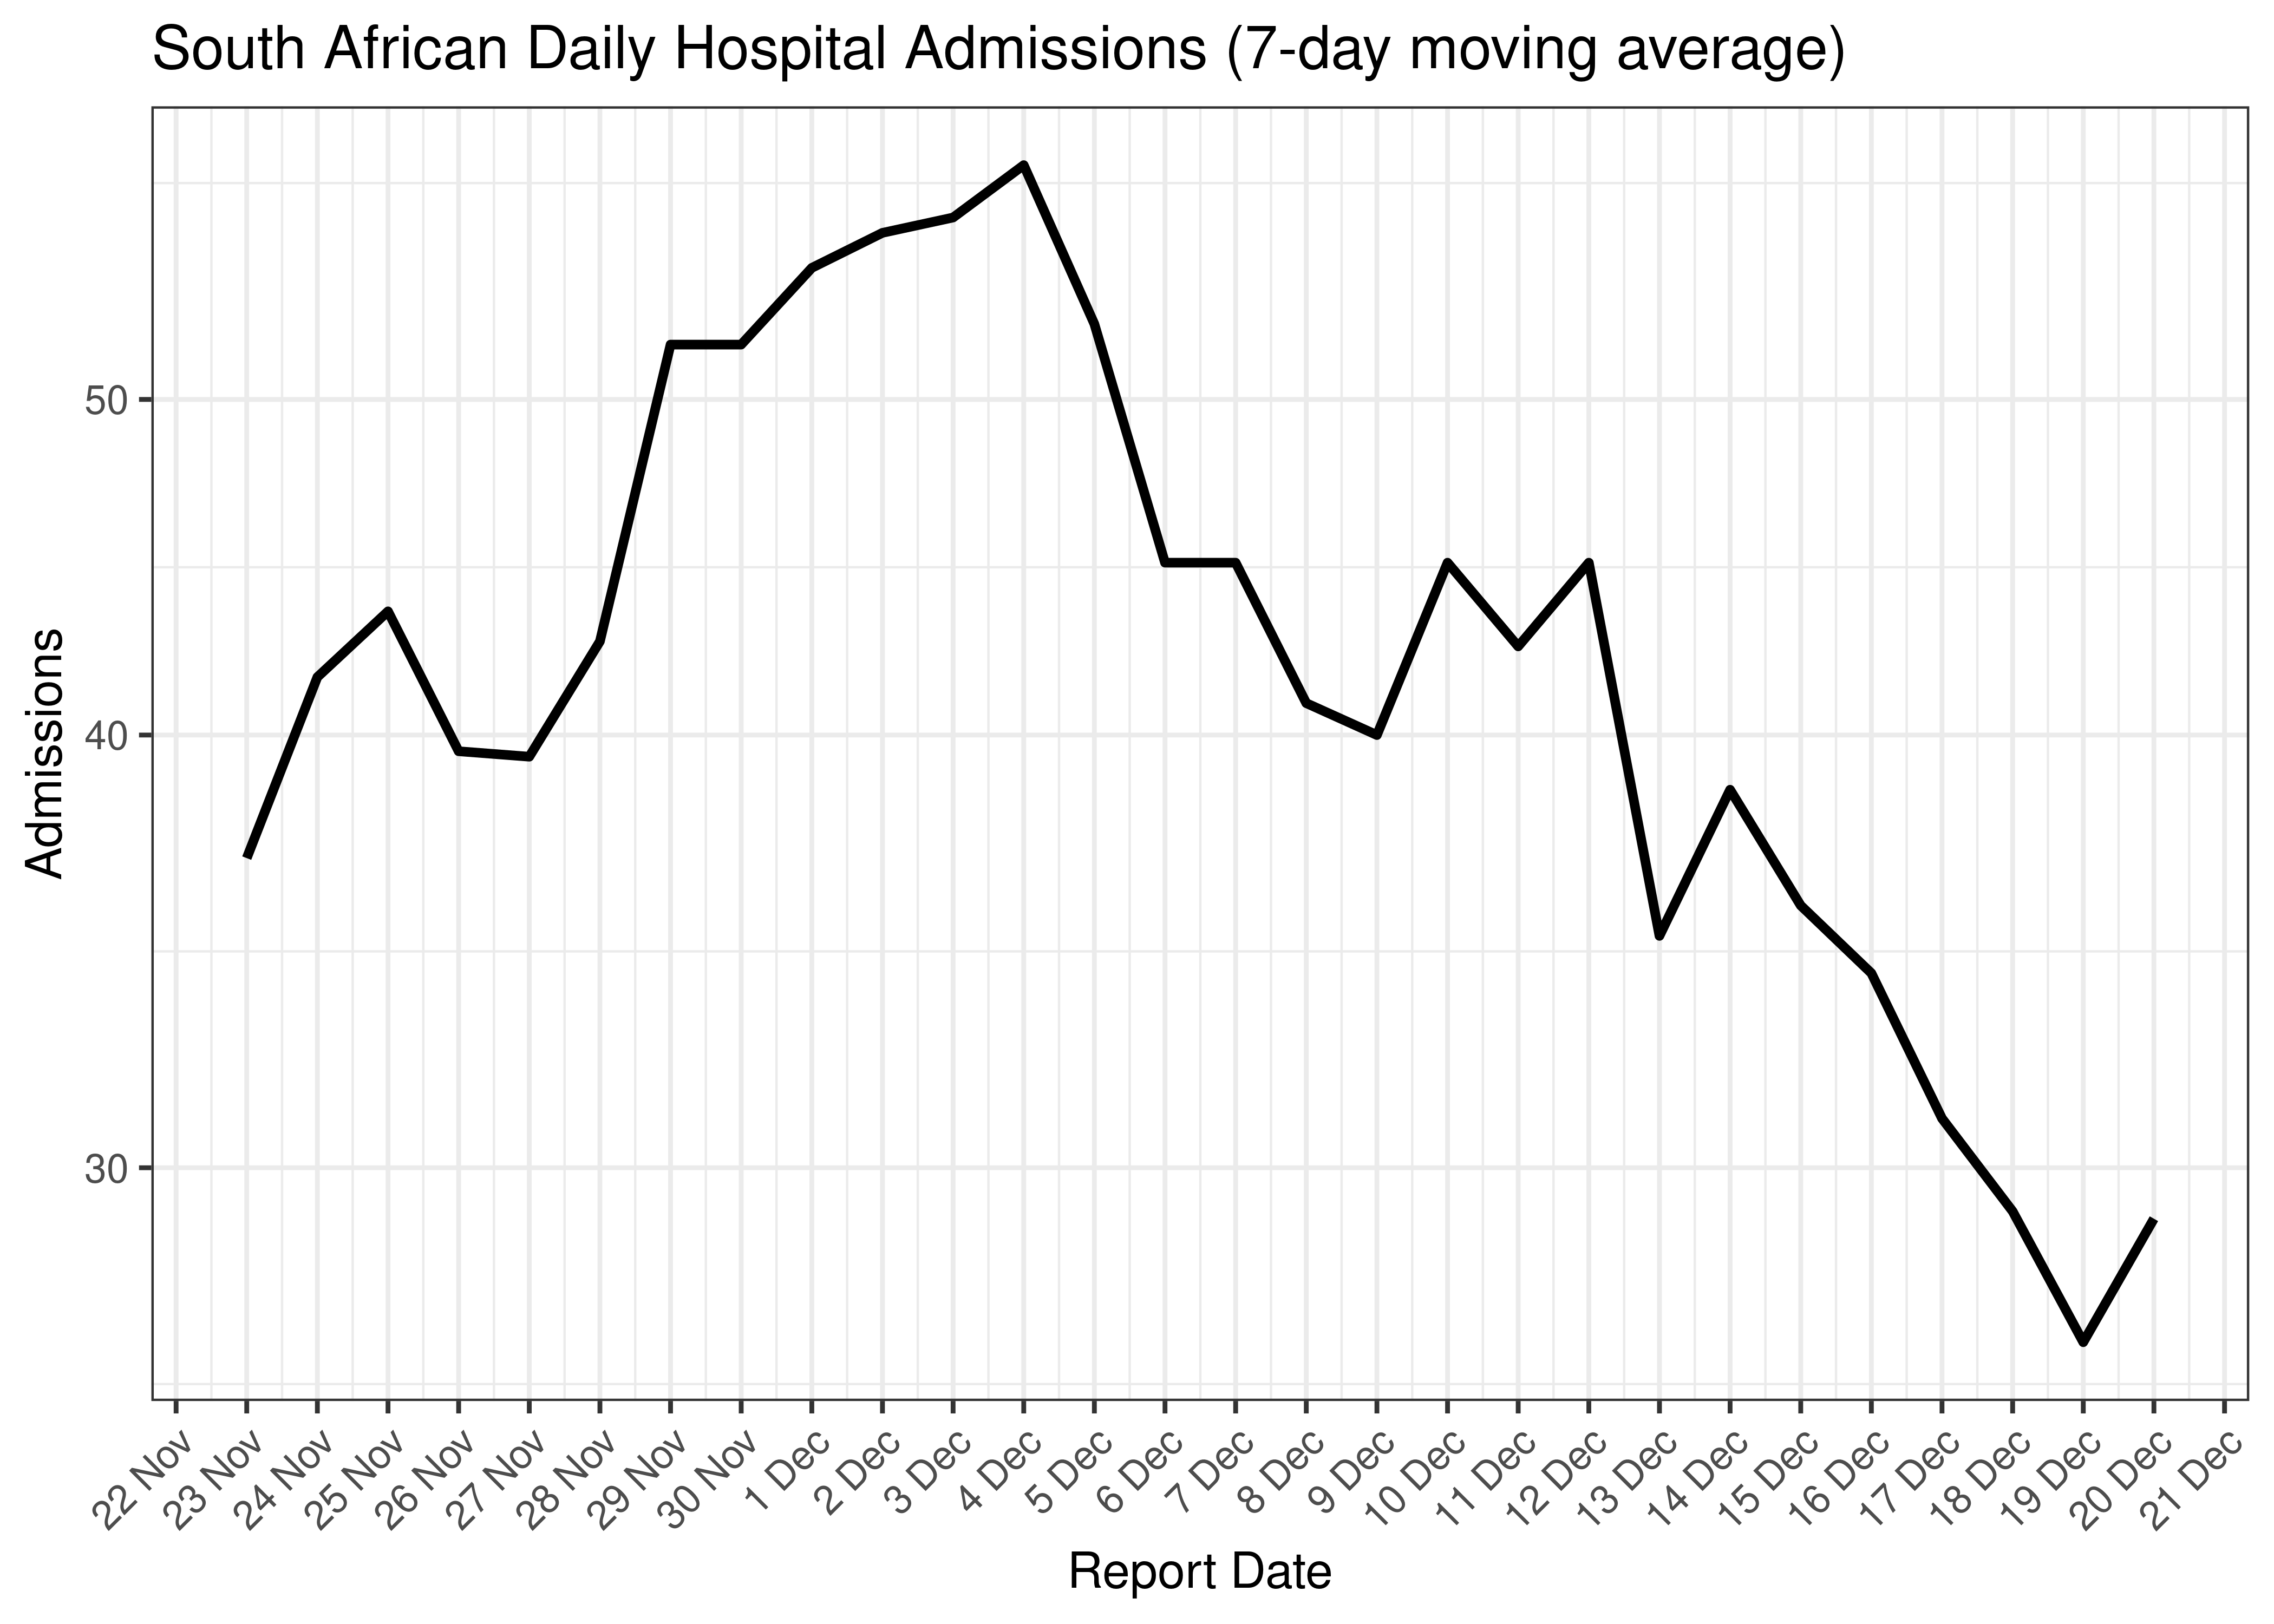 South African Daily Hospital Admissions for Last 30-days (7-day moving average)